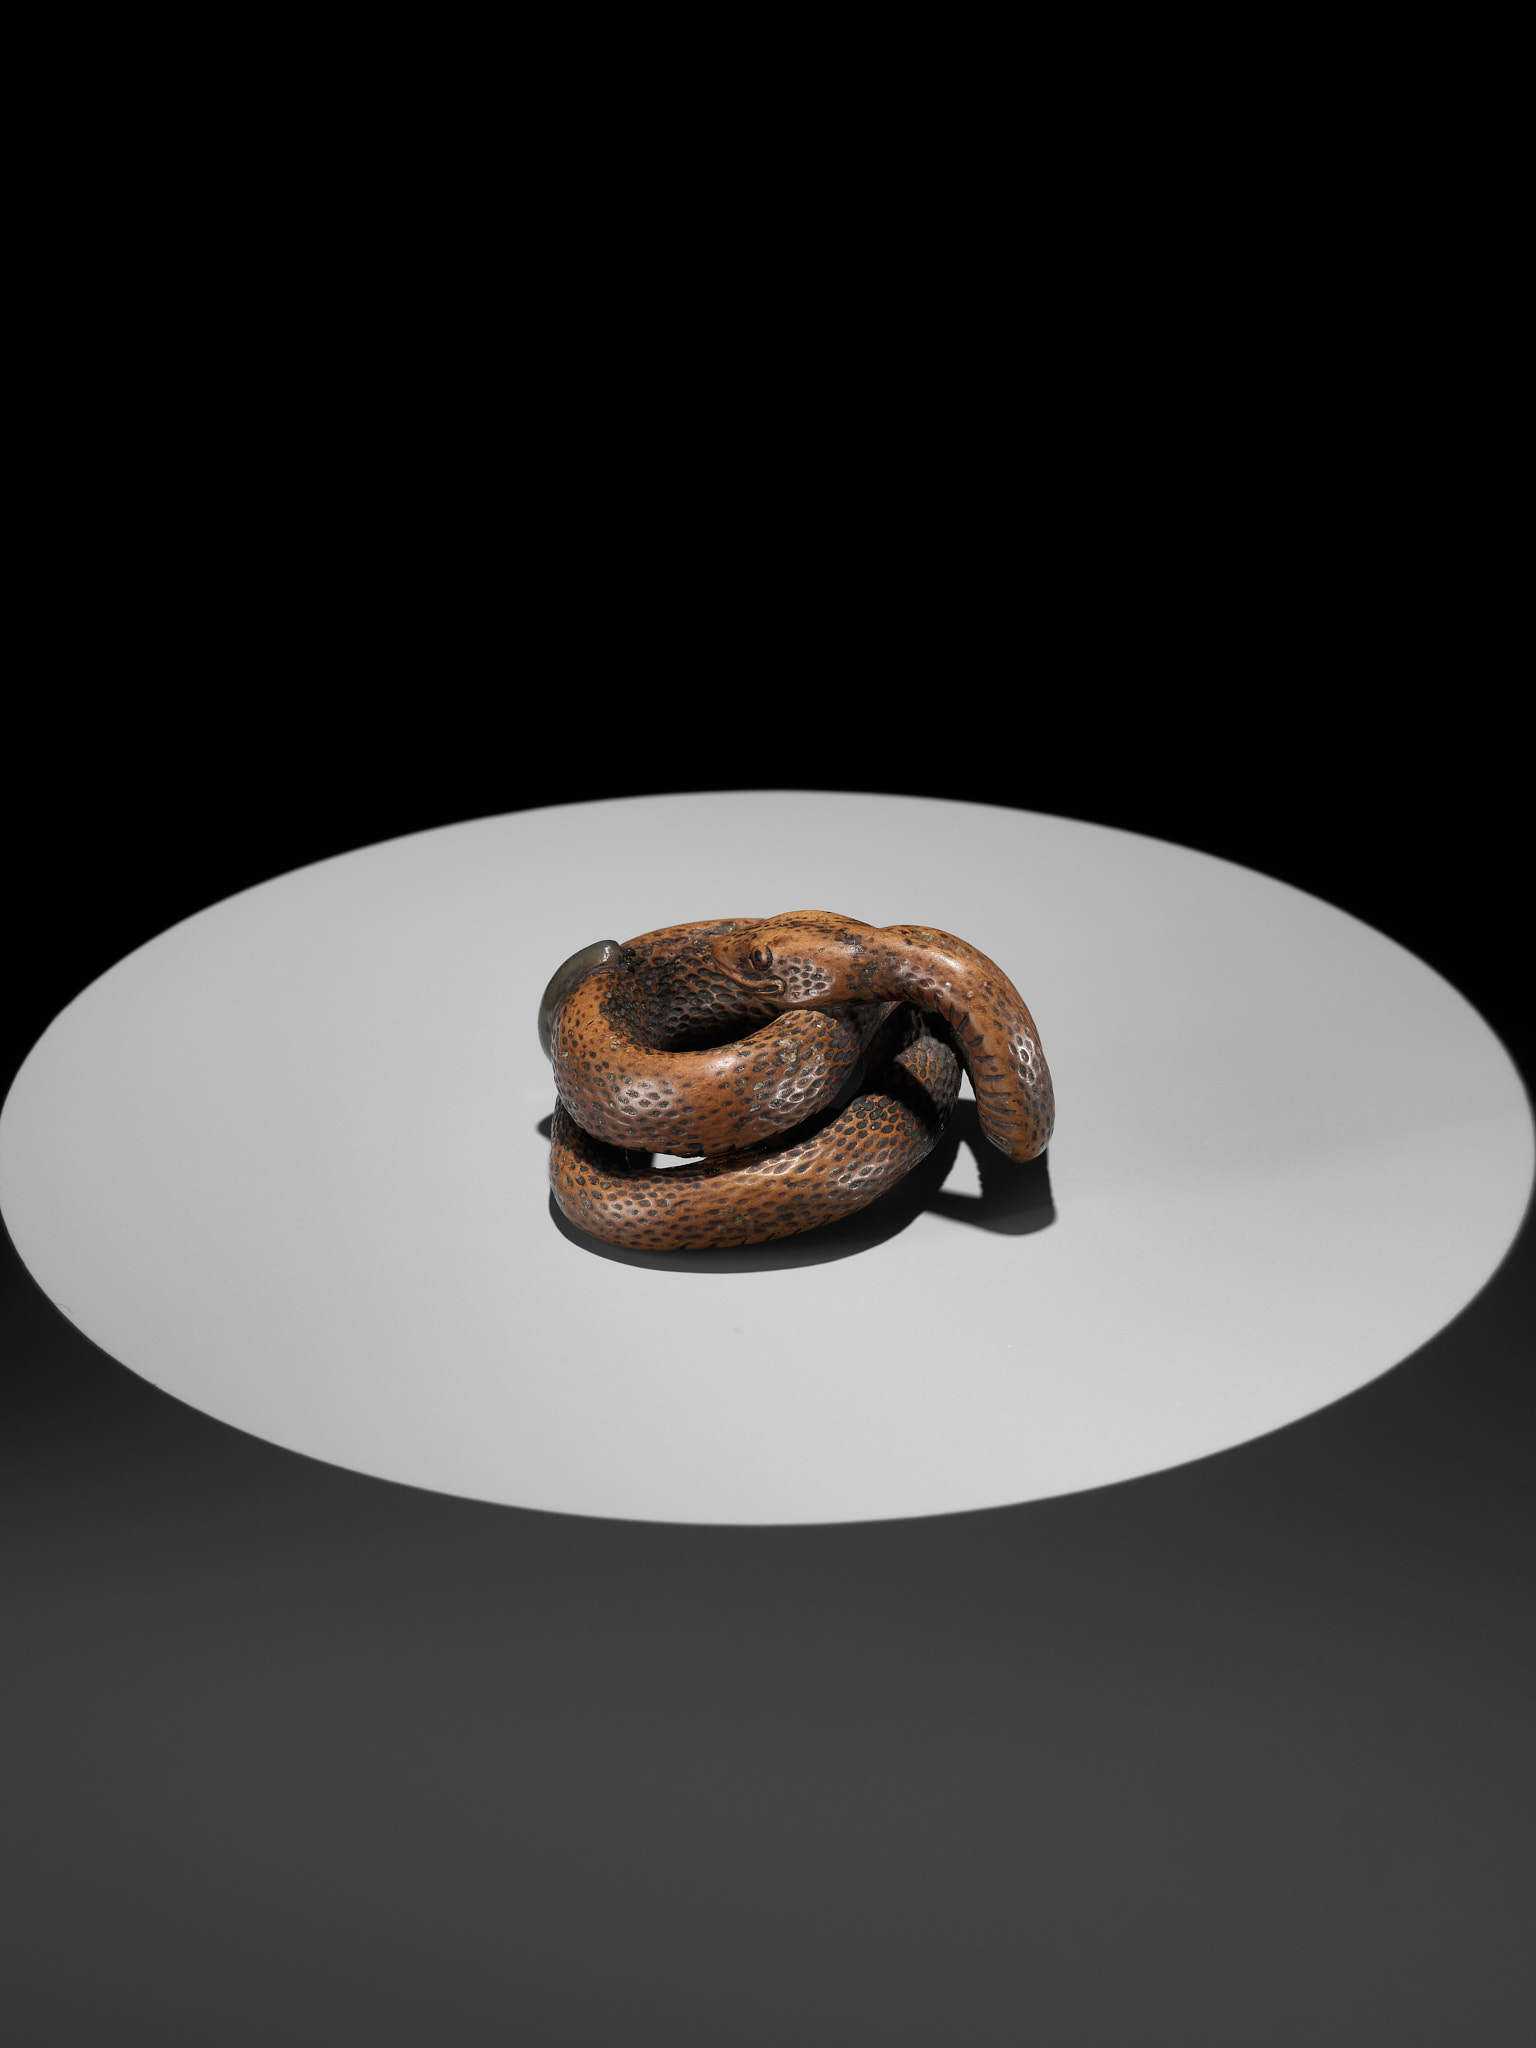 A LARGE AND POWERFUL WOOD NETSUKE OF A COILED SNAKE WITH AN INLAID SLUG BY TOMOKAZU - Image 6 of 13